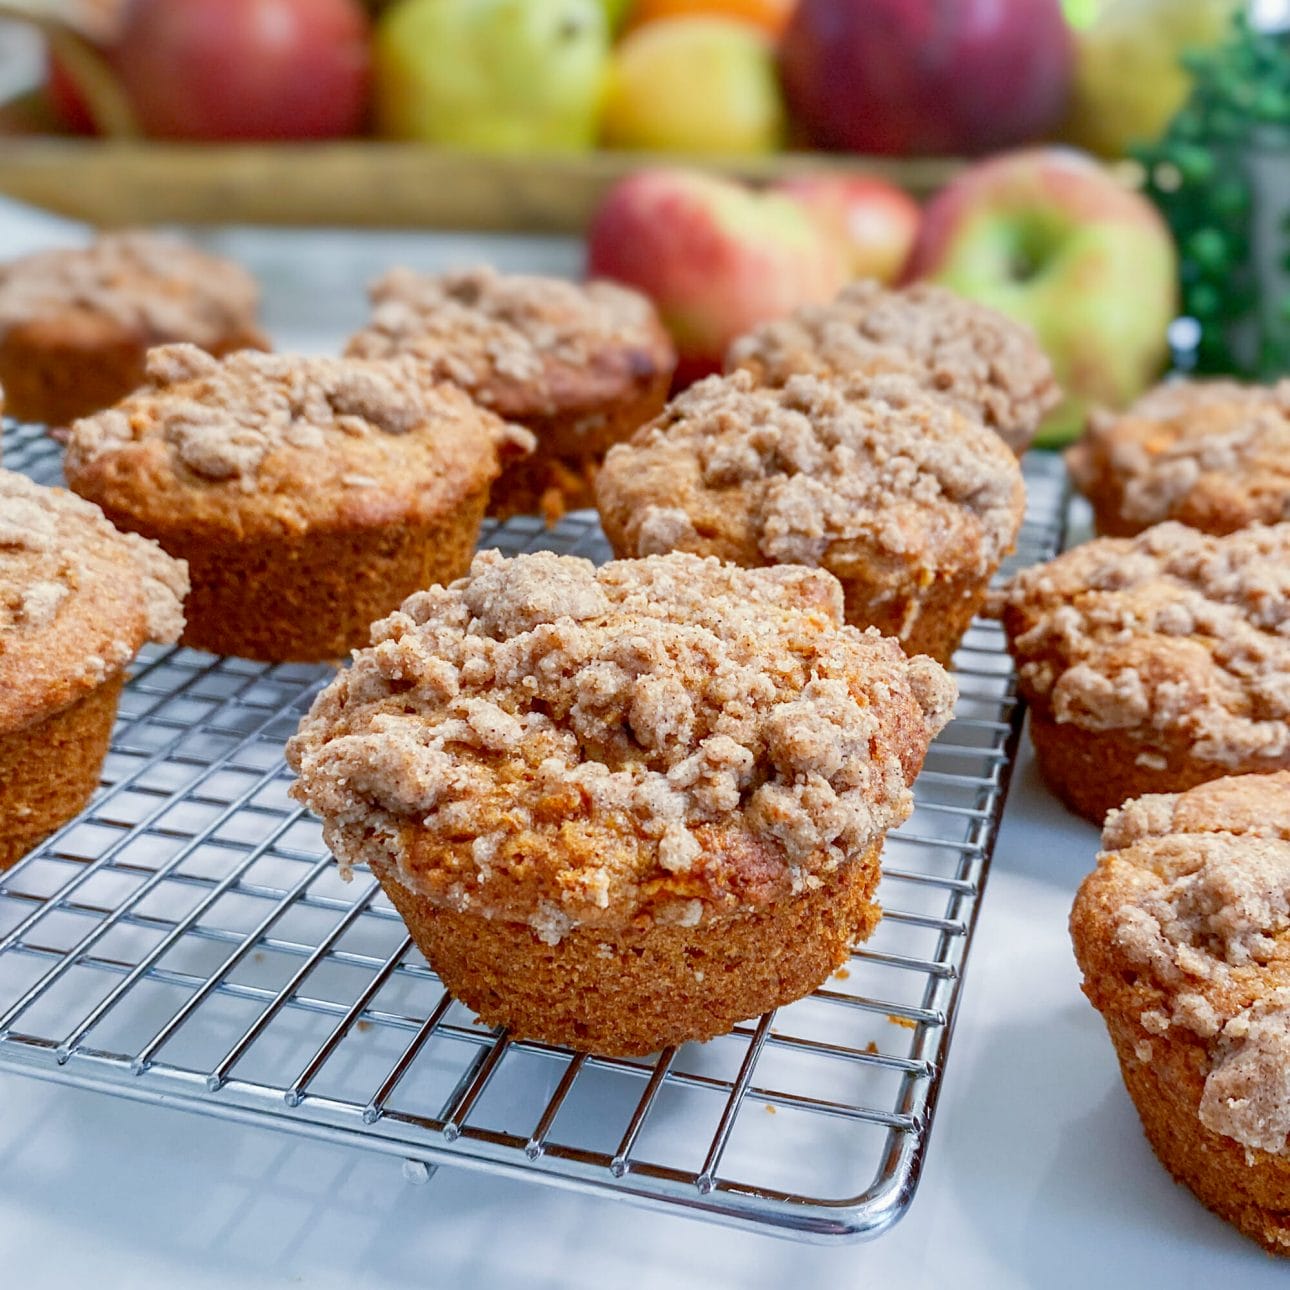 carrot and applesauce muffin on rack